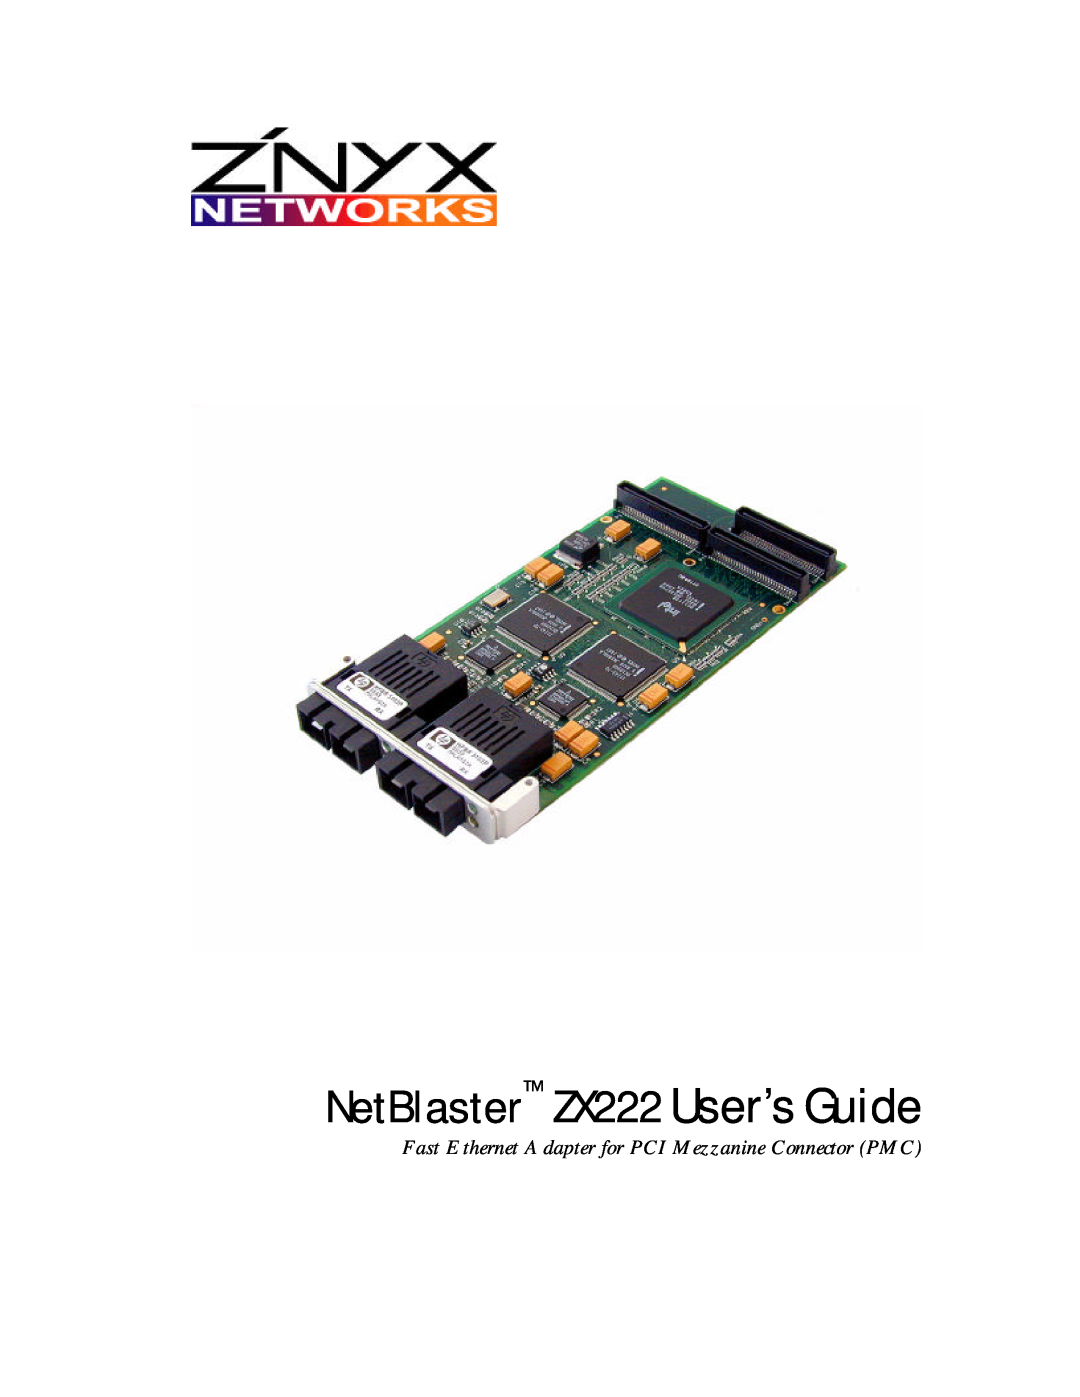 Znyx Networks manual NetBlaster ZX222 User’s Guide, Fast Ethernet Adapter for PCI Mezzanine Connector PMC 